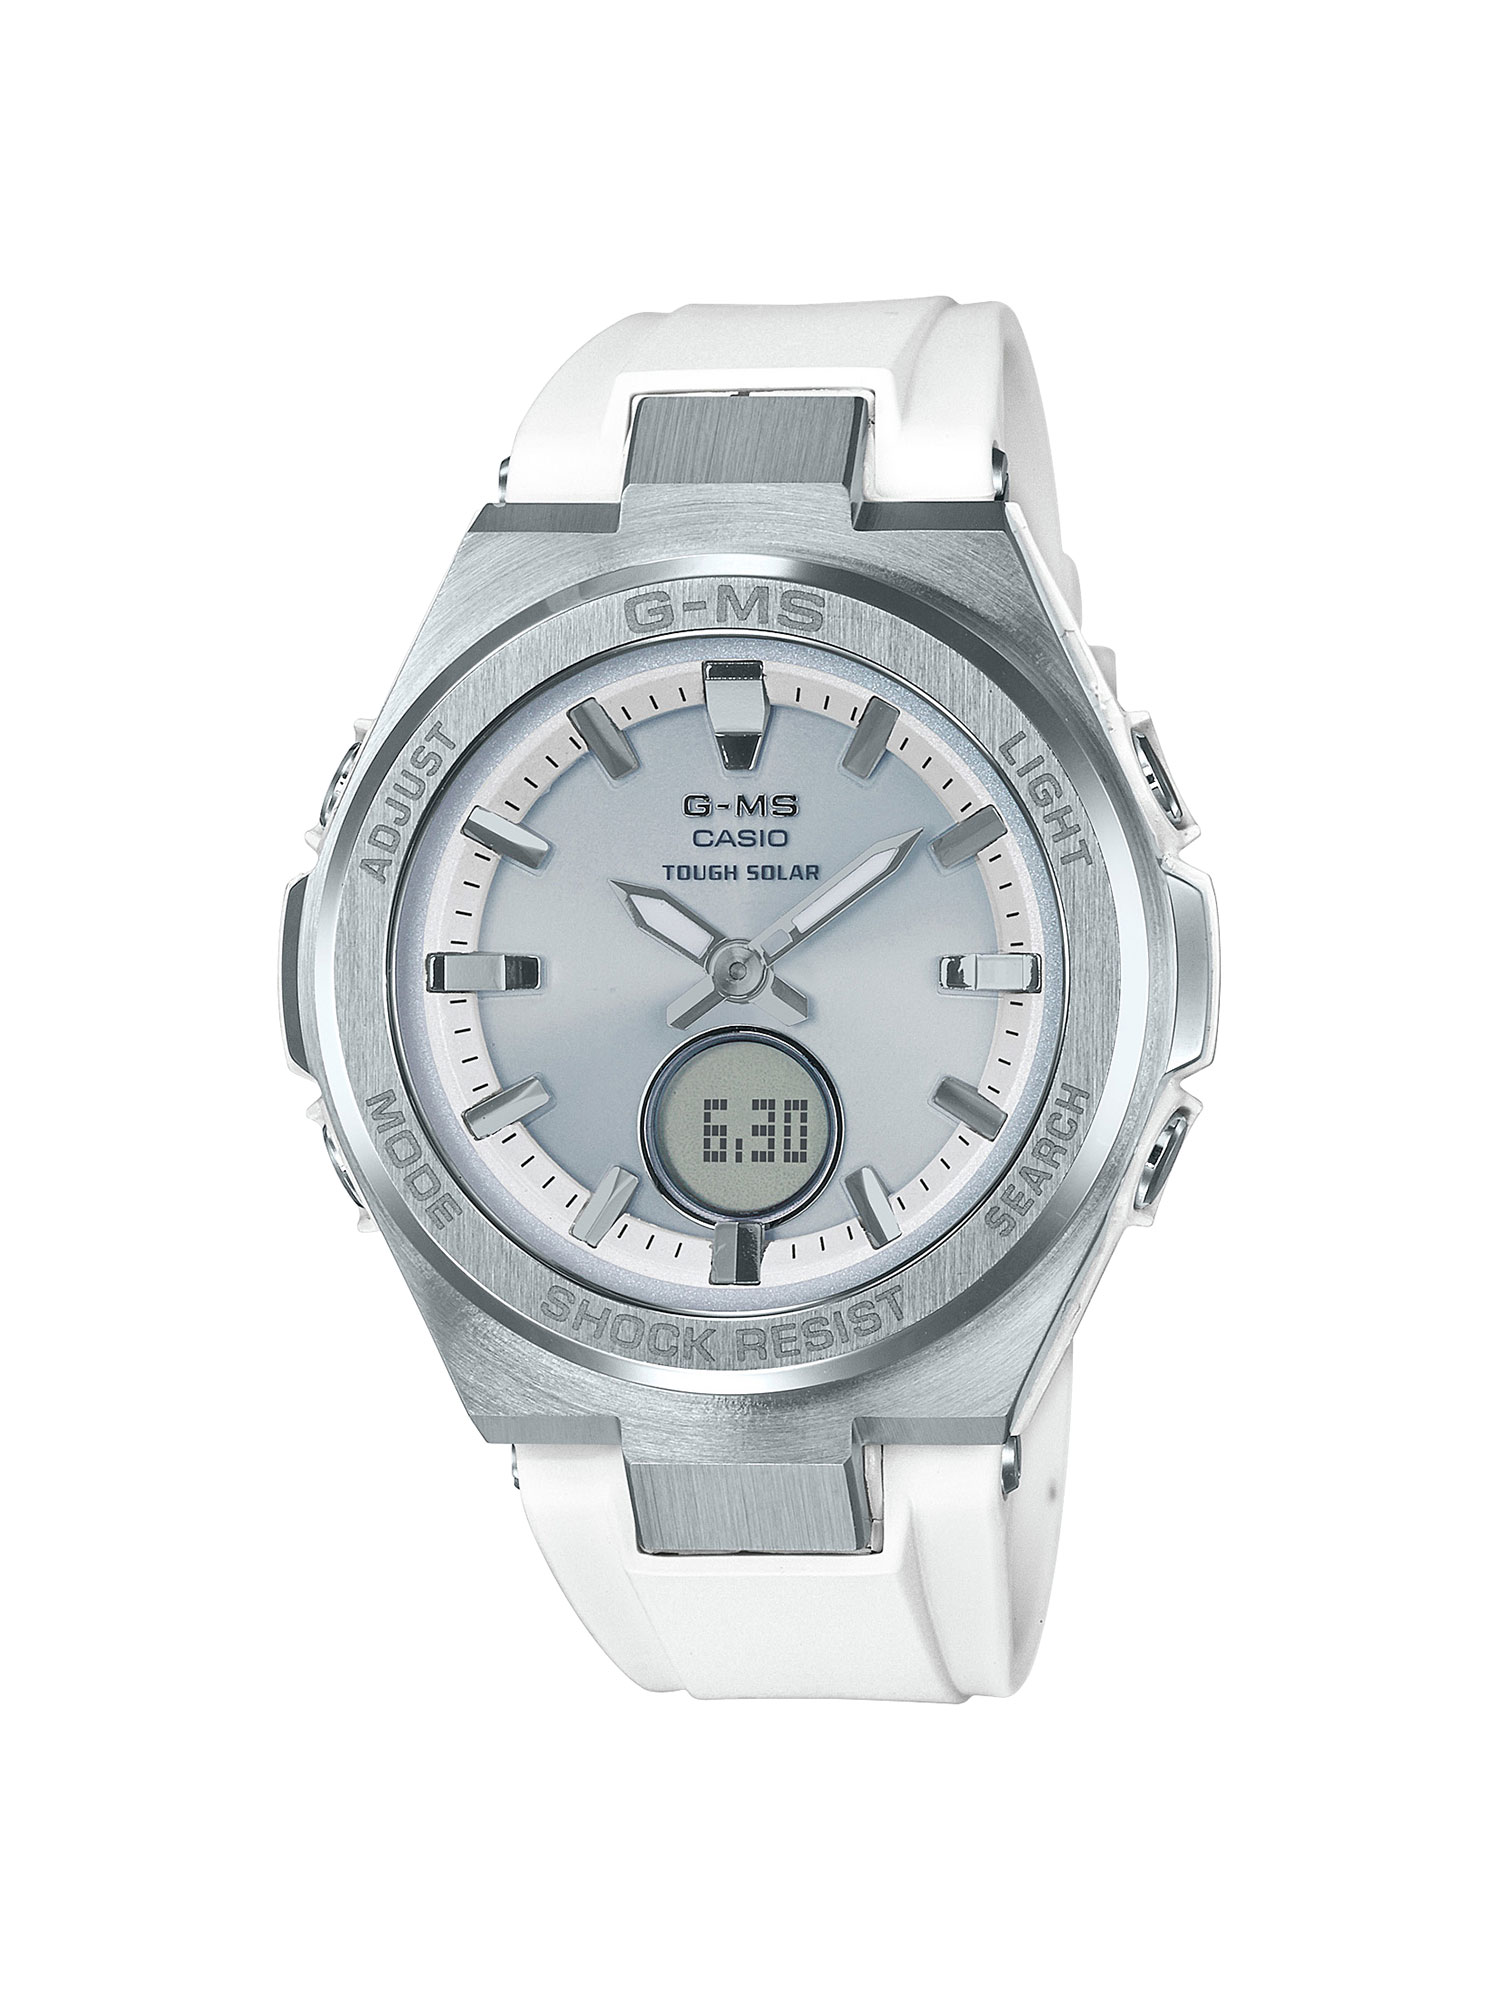 Casio Introduces New BABY-G Collection for Modern Women